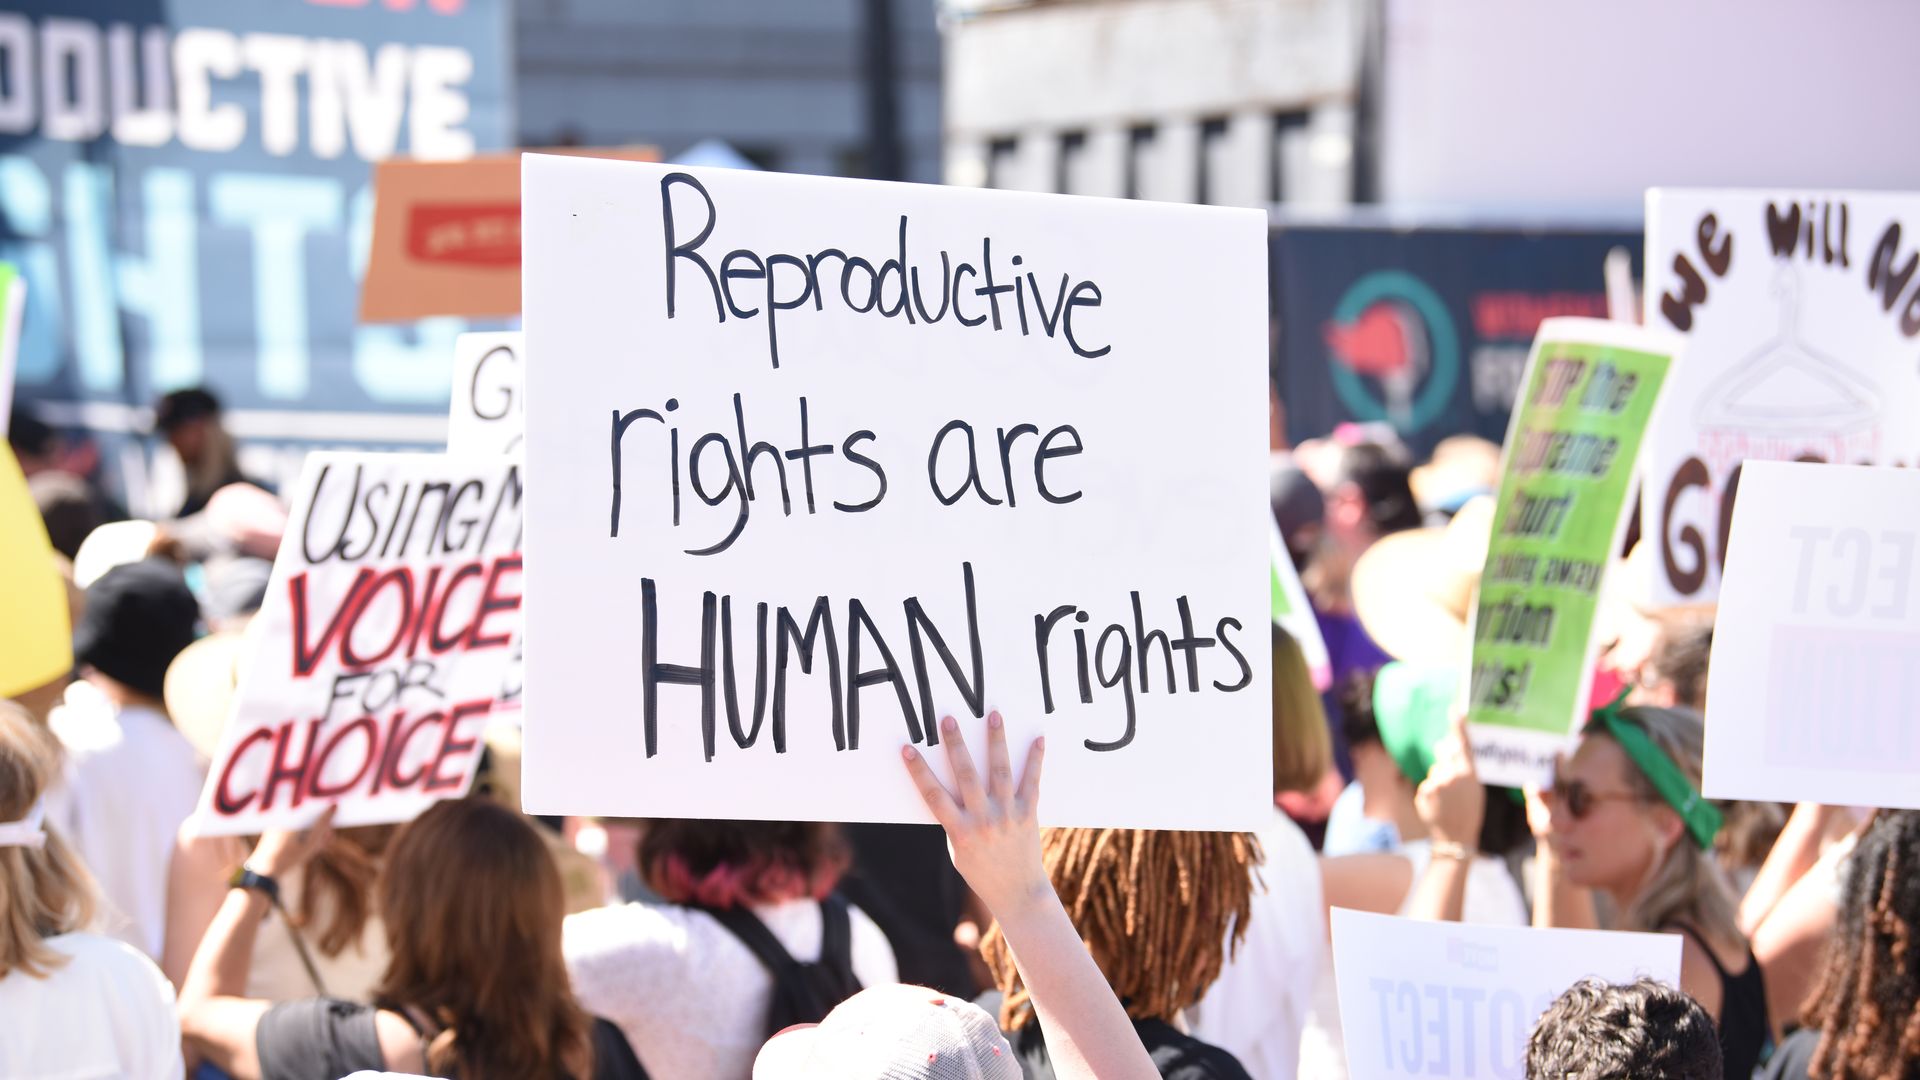 Photo of a person holding up a sign that says "Reproductive rights are human rights" at a protest 